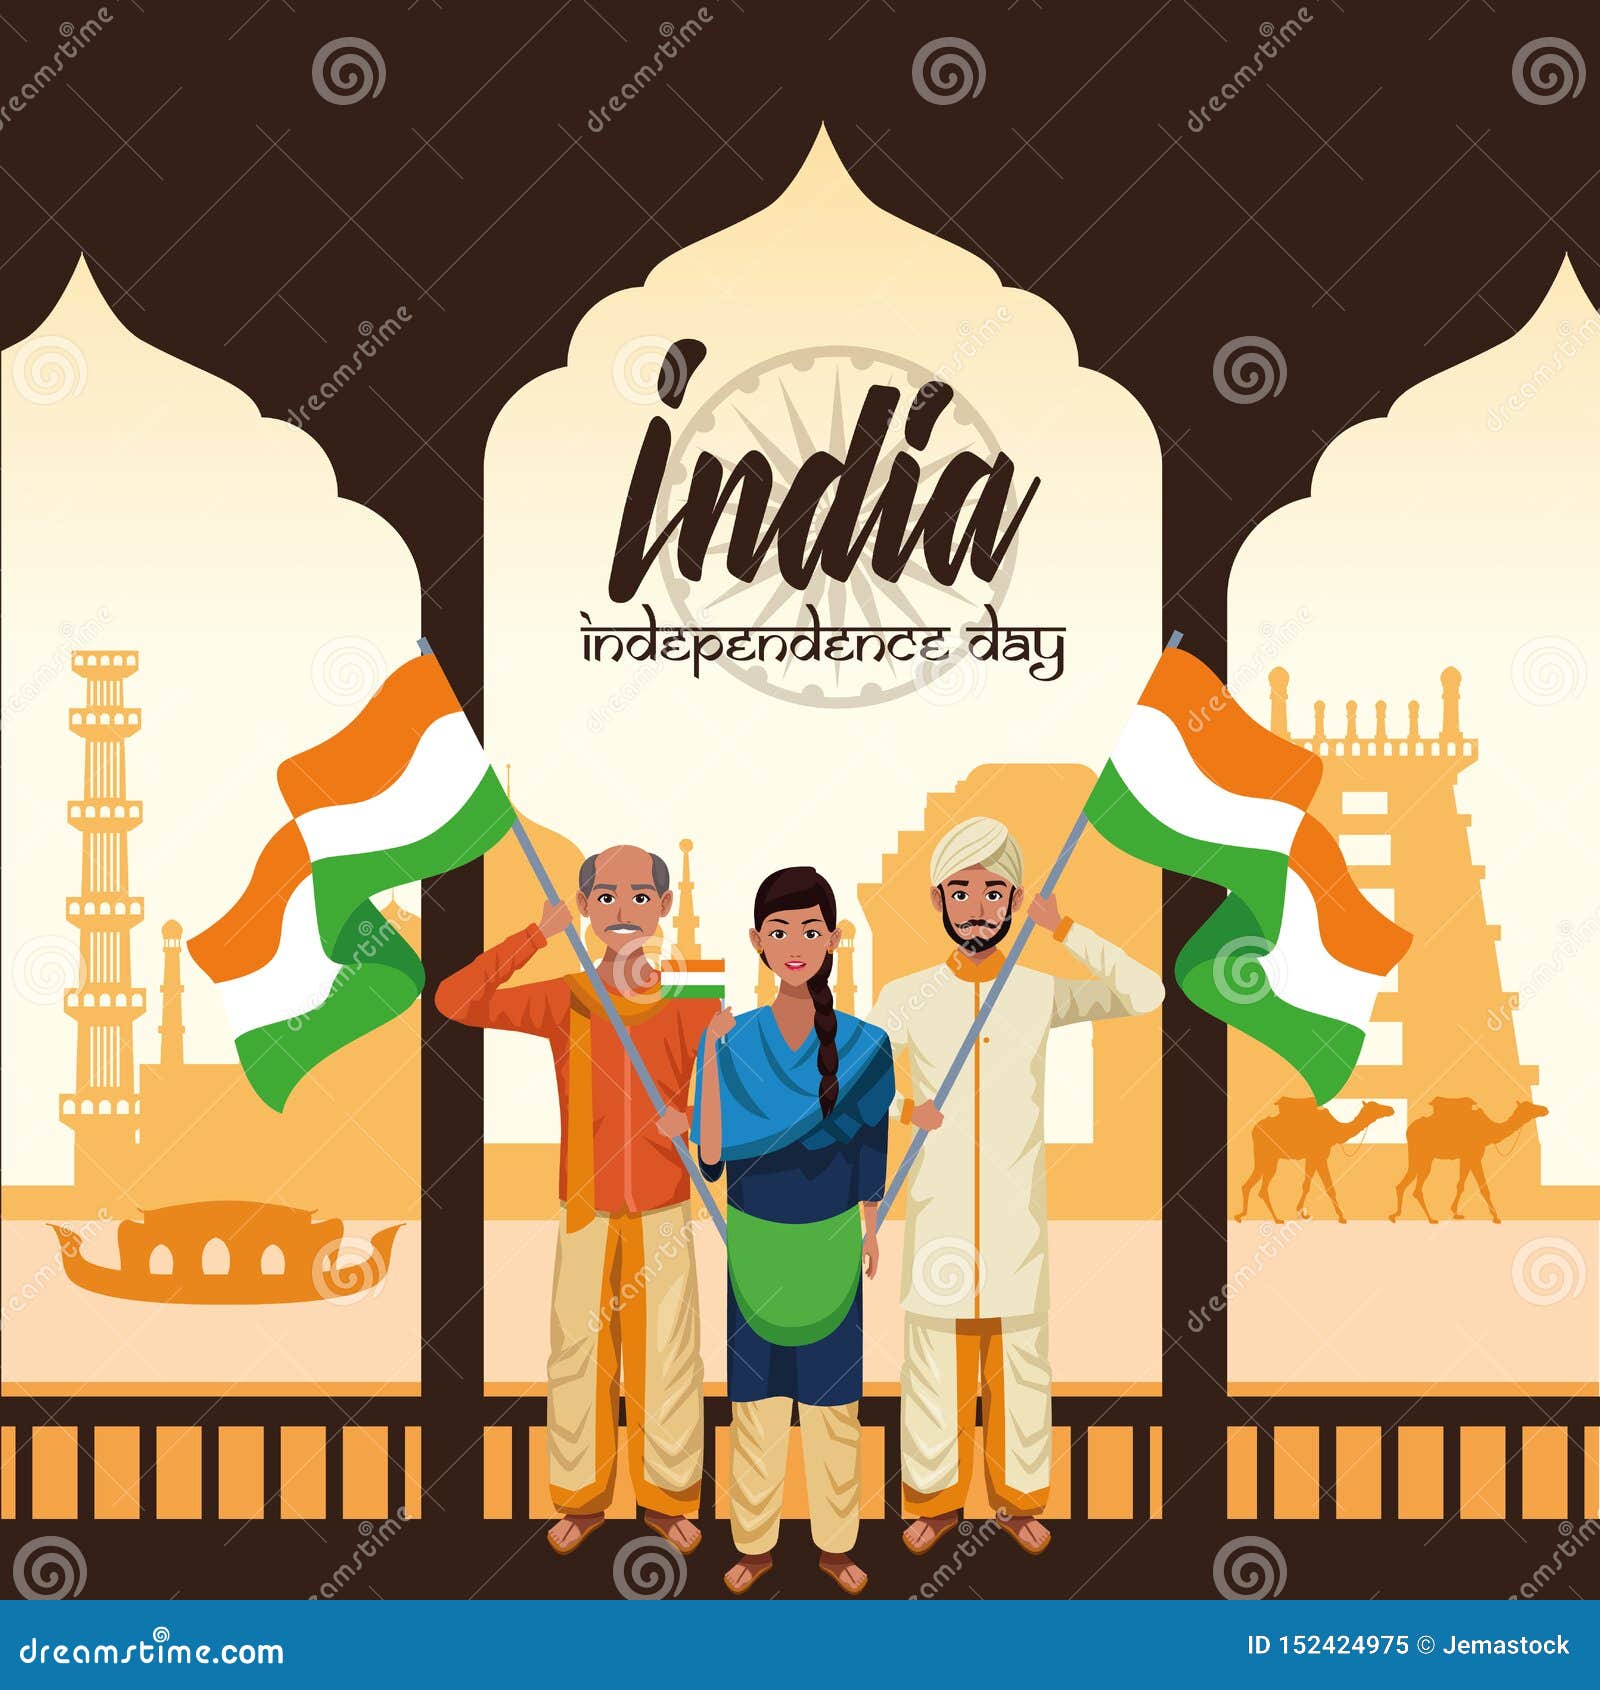 India Independence Day Card Stock Vector - Illustration of indian, design:  152424975